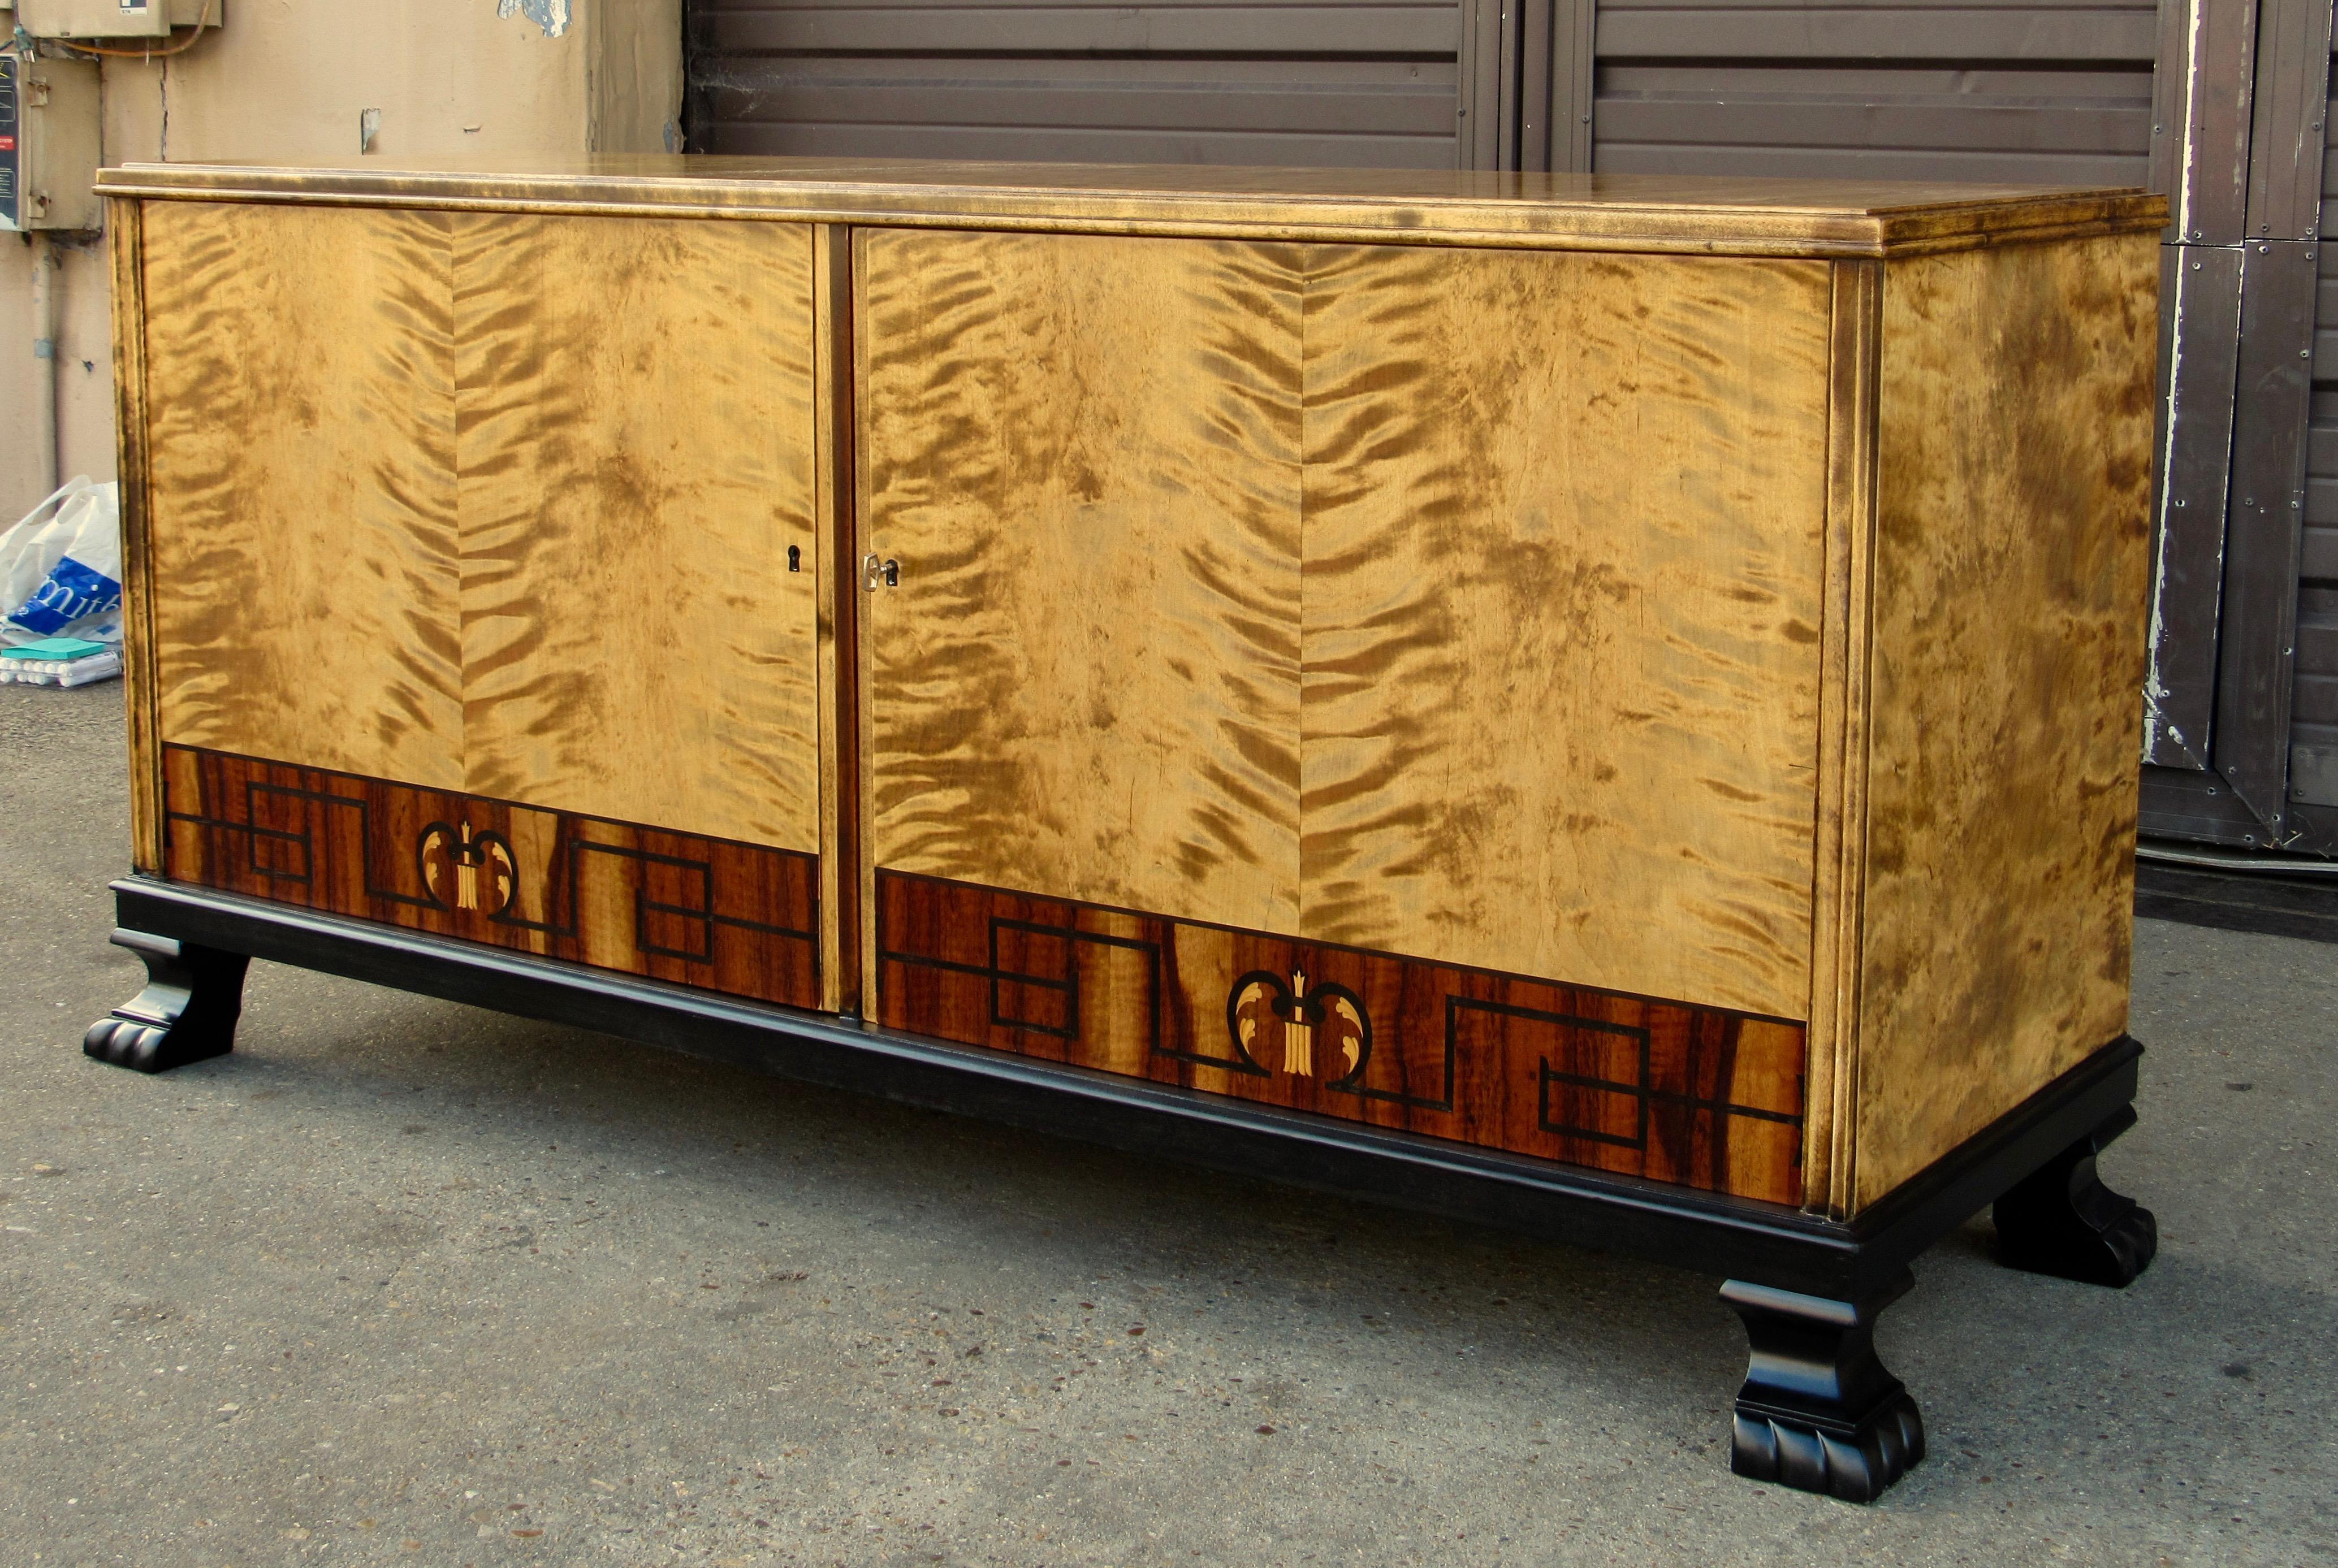 Swedish Art Deco sideboard/cabinet rendered in highly figured, bookmatched golden flame birch. Banded inlay in rosewood and ebony. With ebonized birch wood feet and base. Interior with drawers and removable shelves. This item has just been